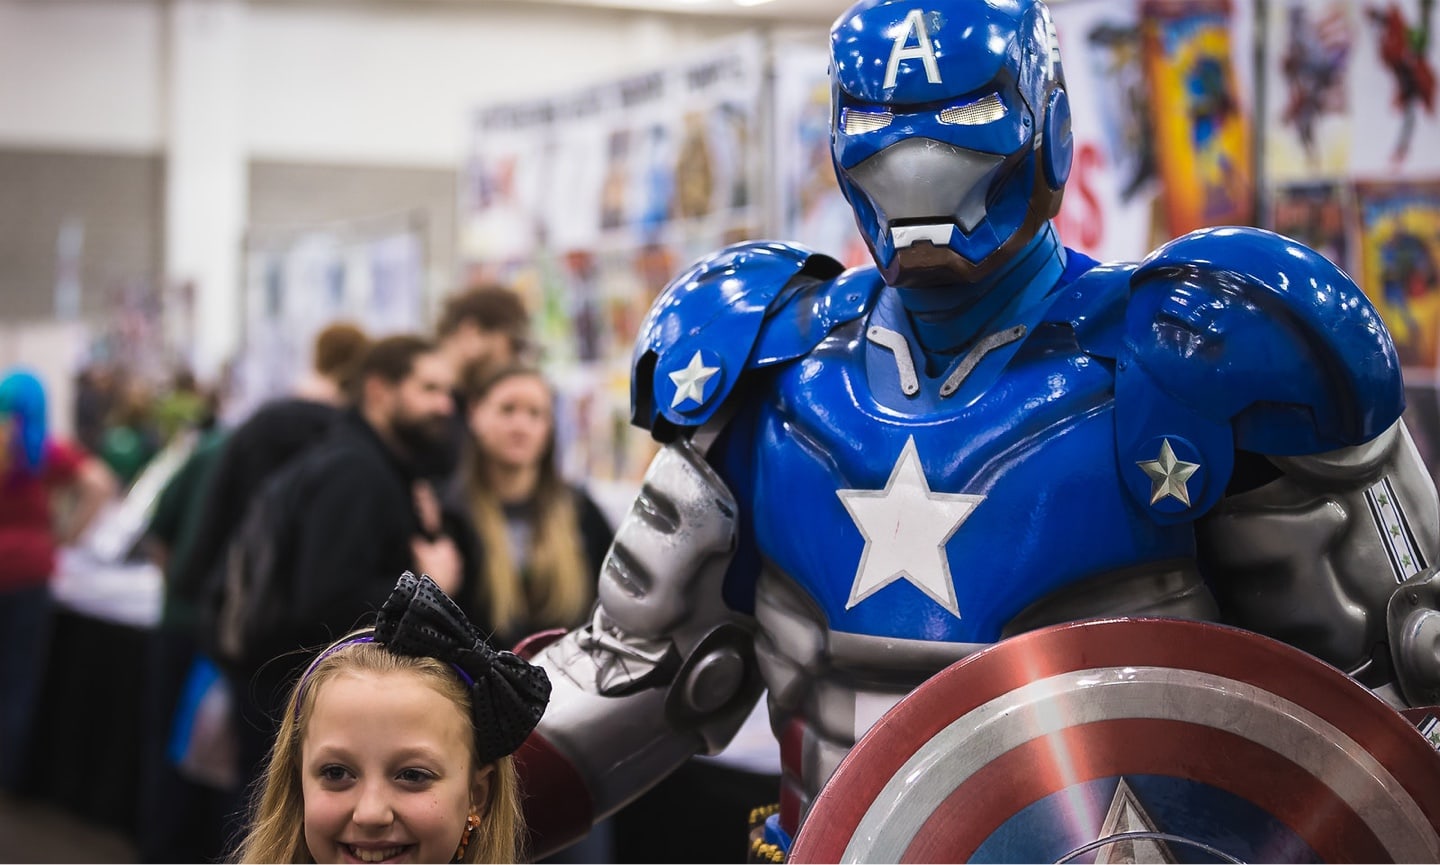 Little girl with man using captain America costume at Wizard World event